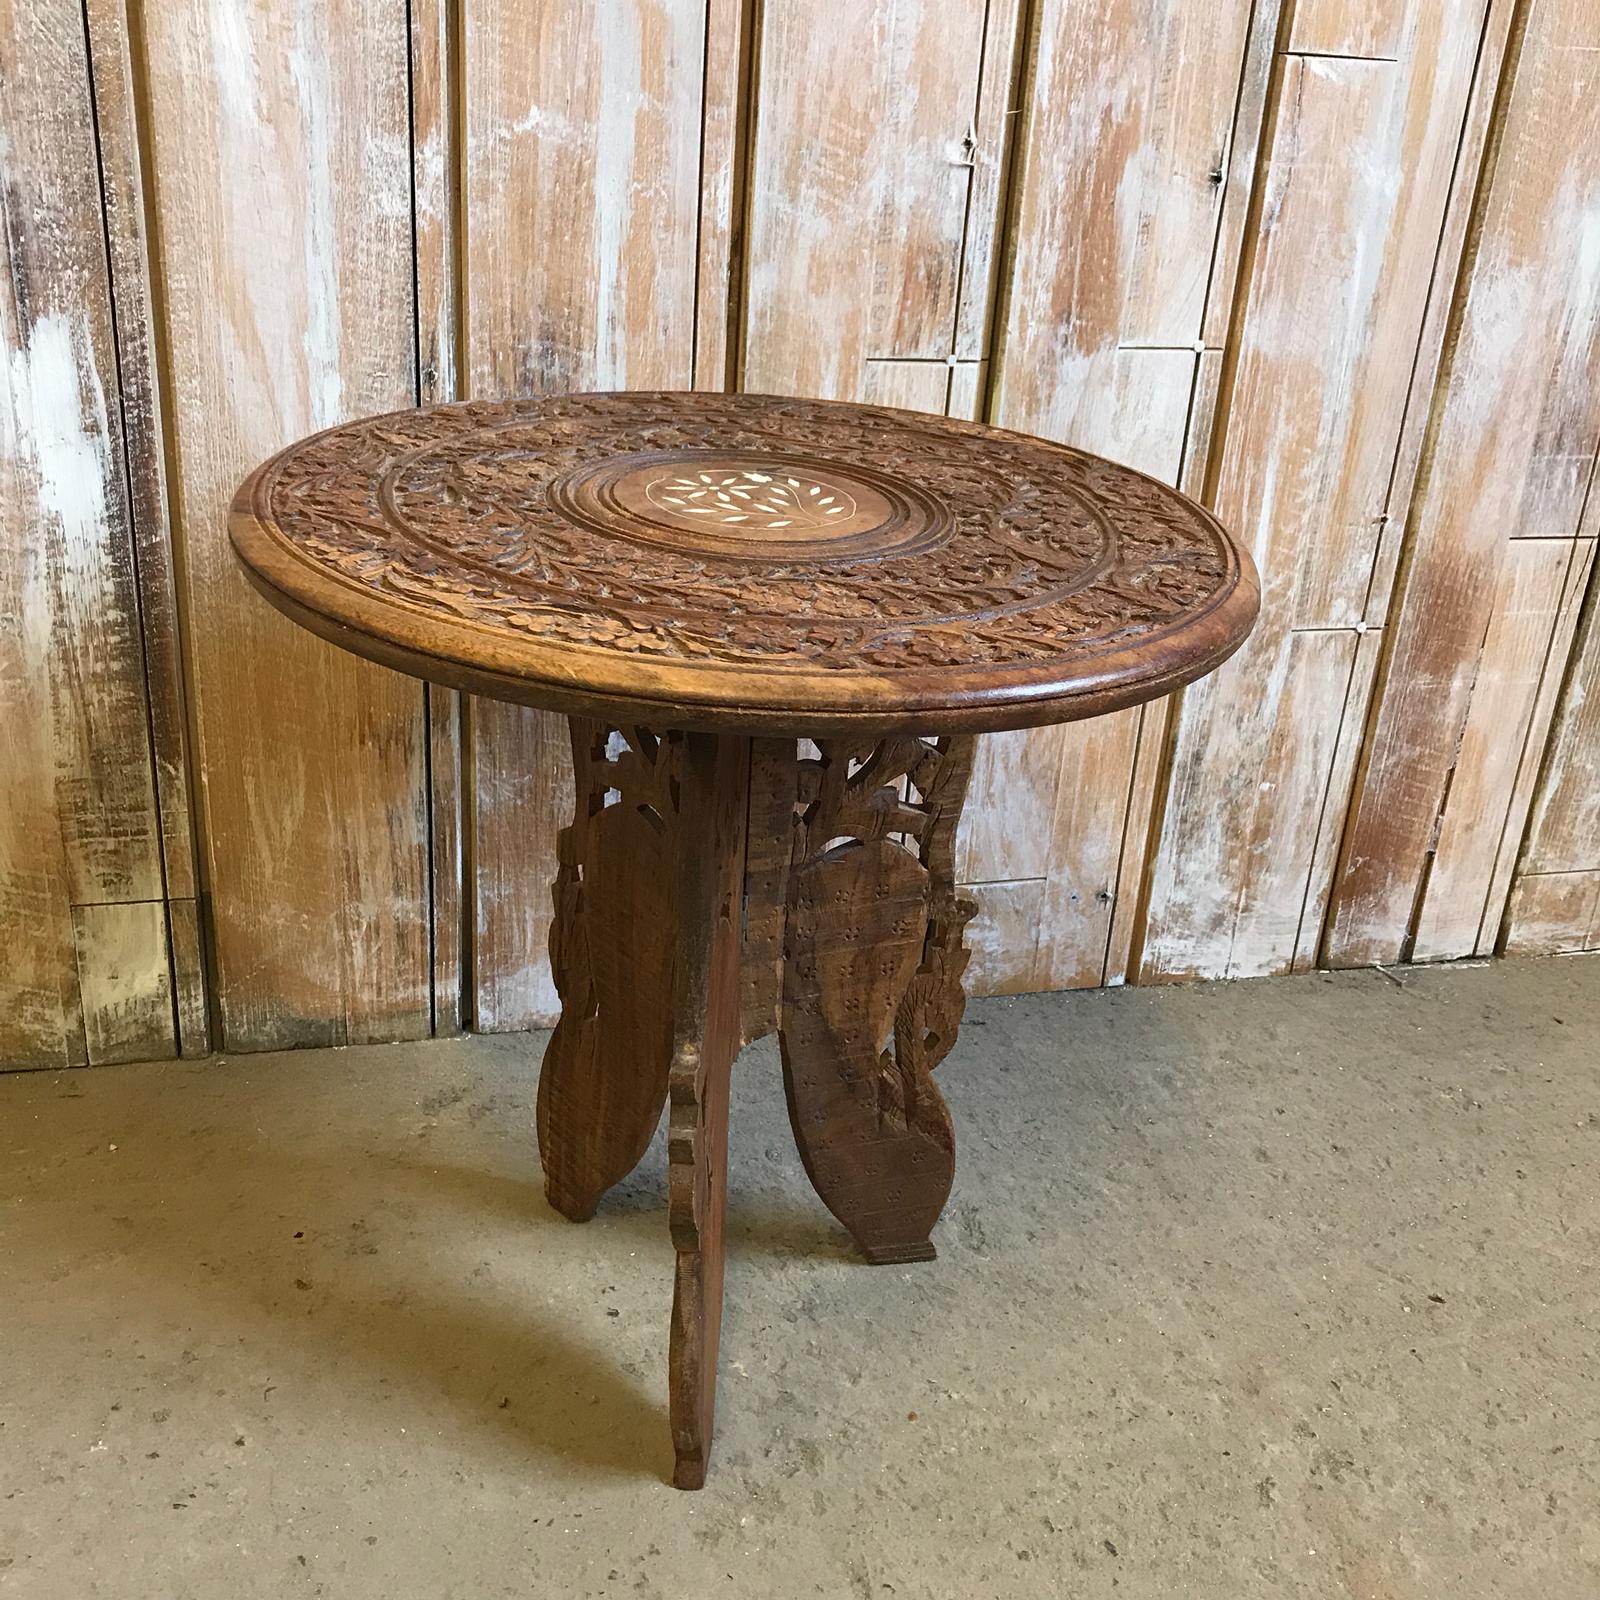 Wooden Carved Moroccan Table